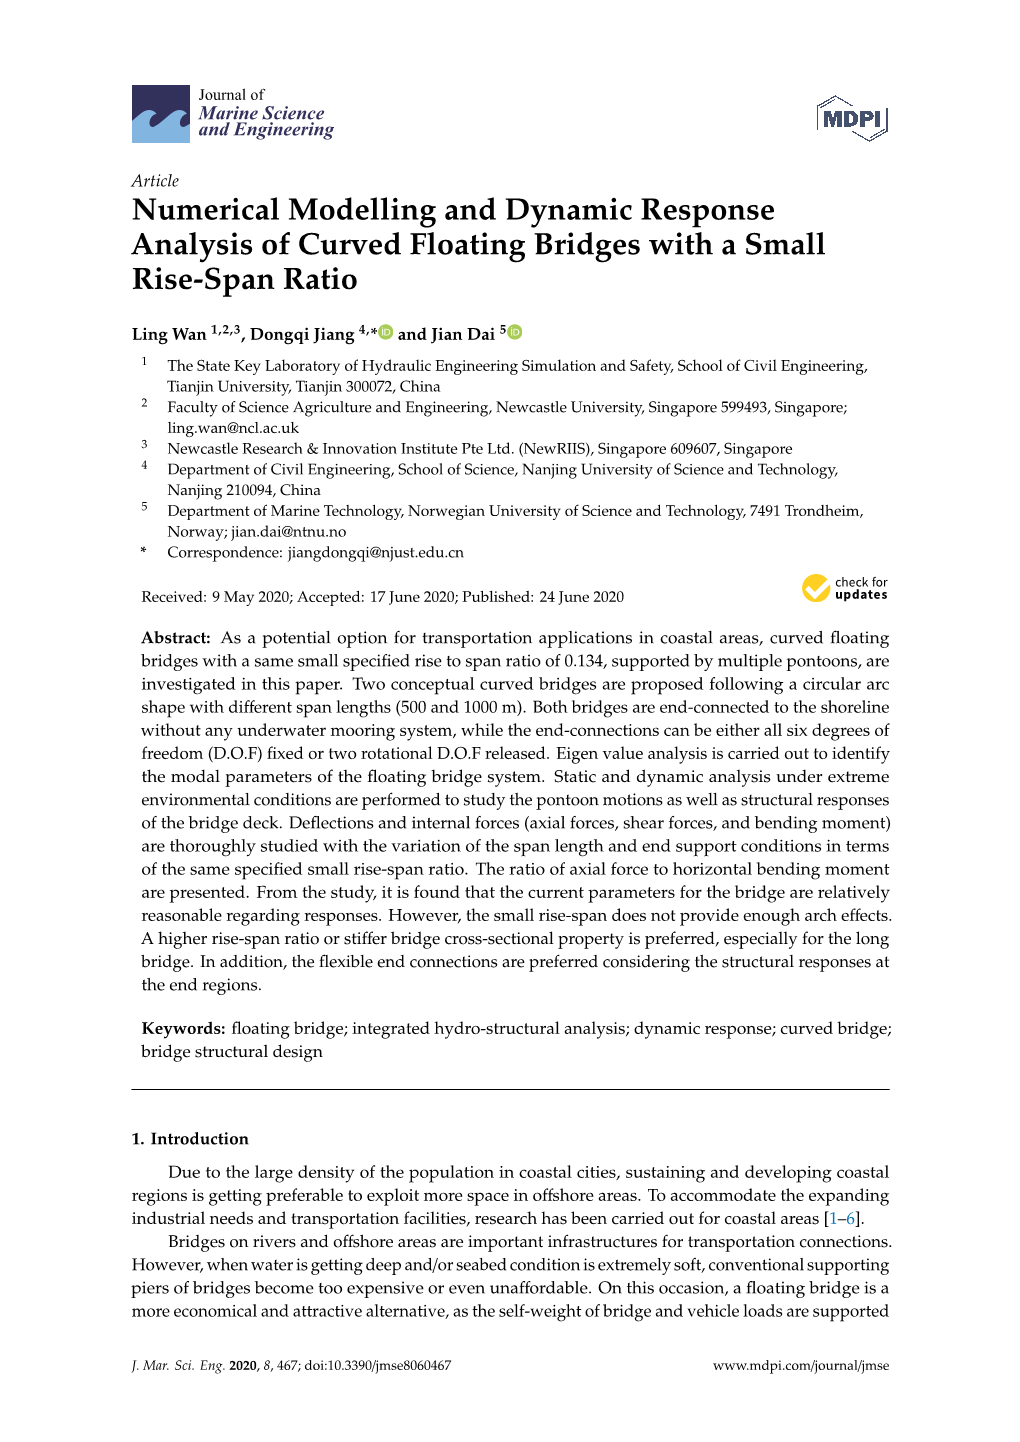 Numerical Modelling and Dynamic Response Analysis of Curved Floating Bridges with a Small Rise-Span Ratio